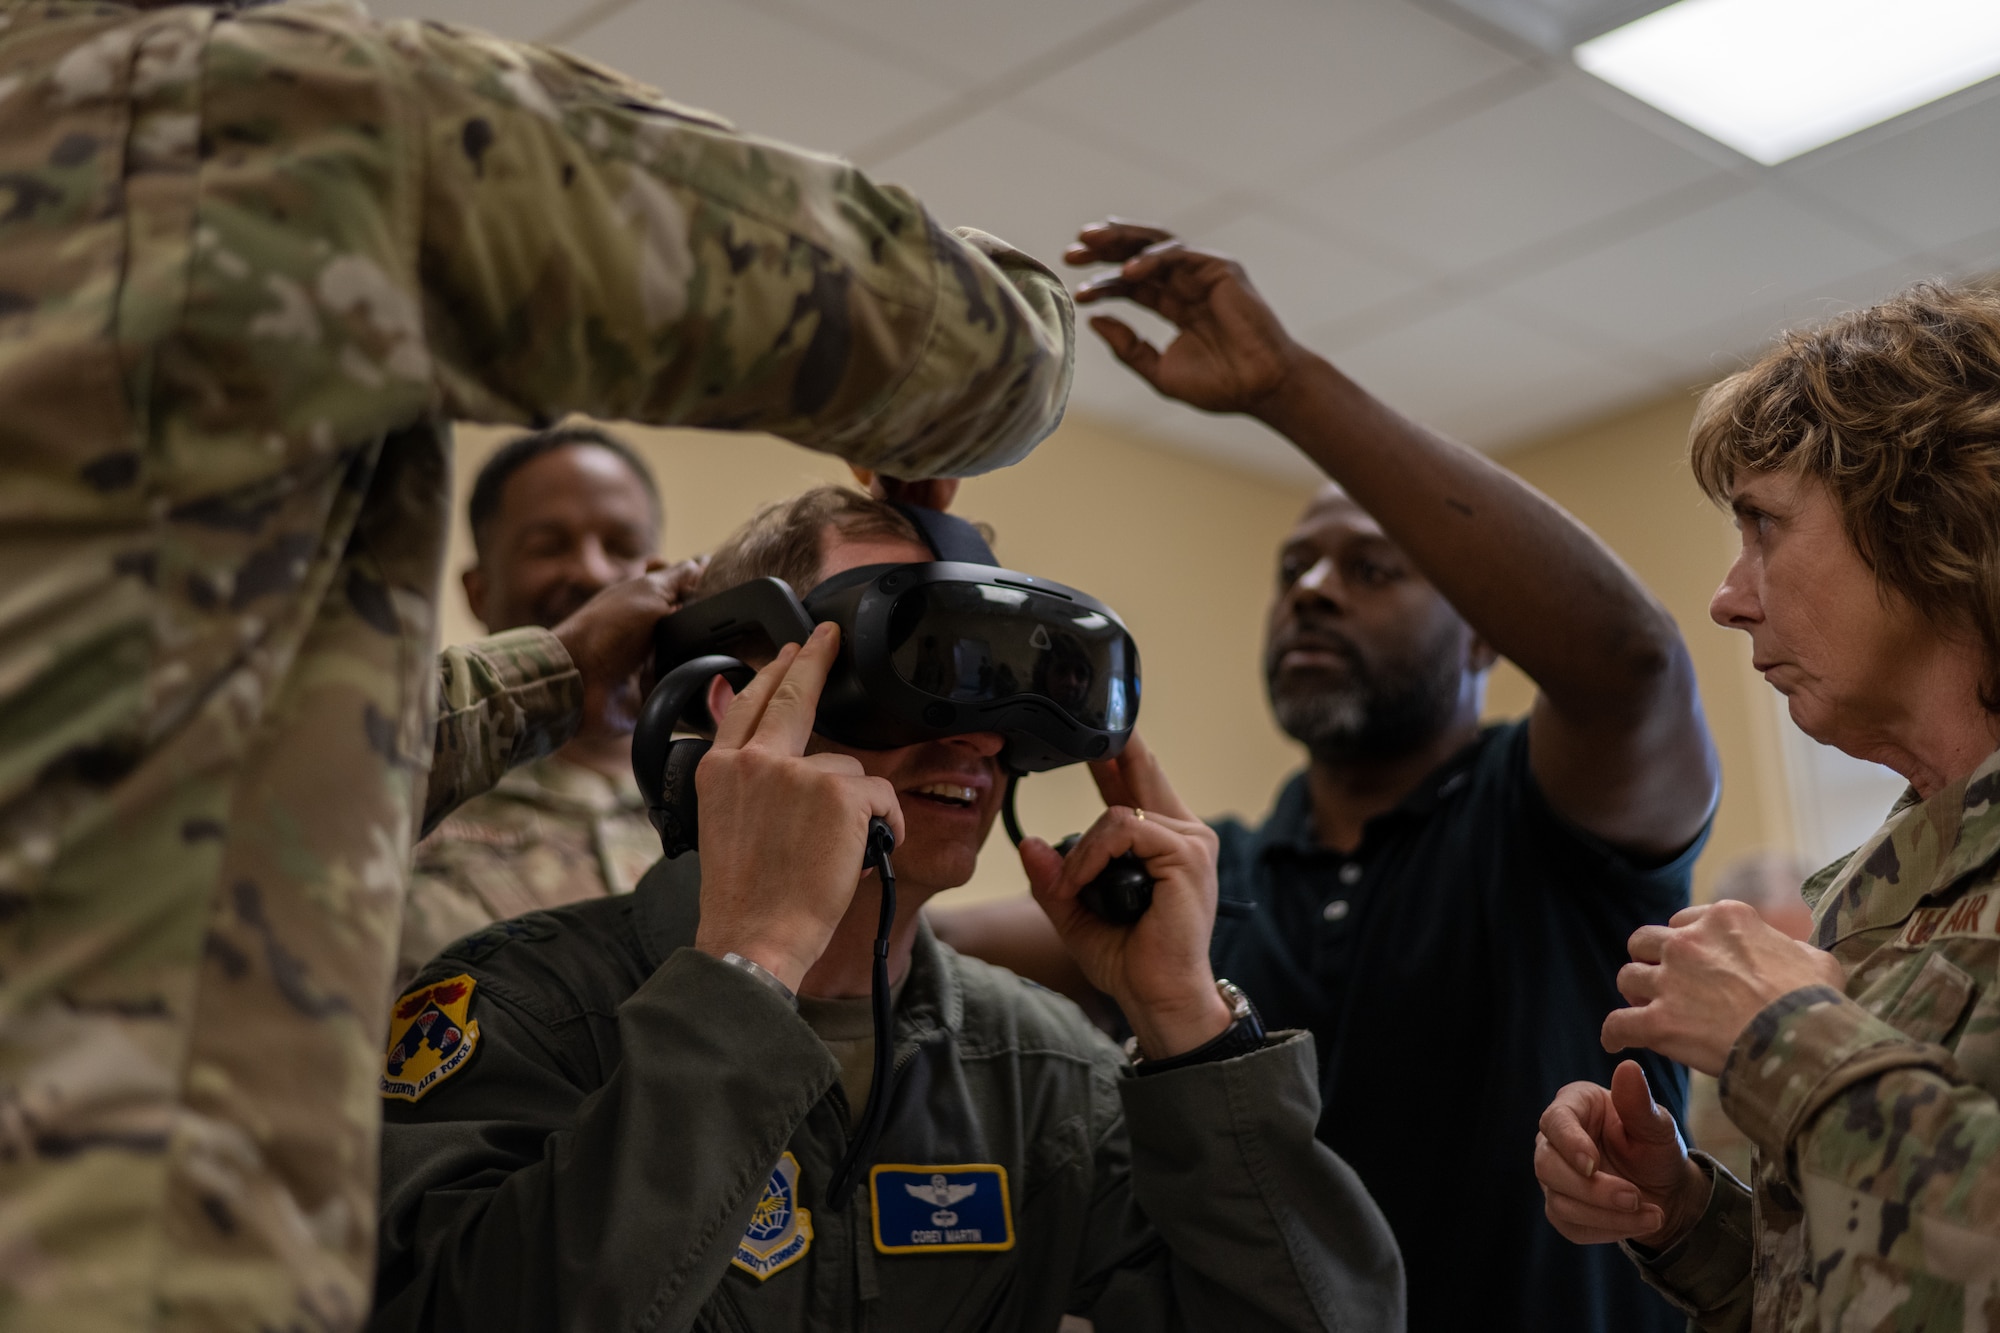 The 6th Medical Group’s virtual reality training utilizes realistic scenarios to simulate a hostile deployed environment. (U.S. Air Force photo by Airman 1st Class Zachary Foster)